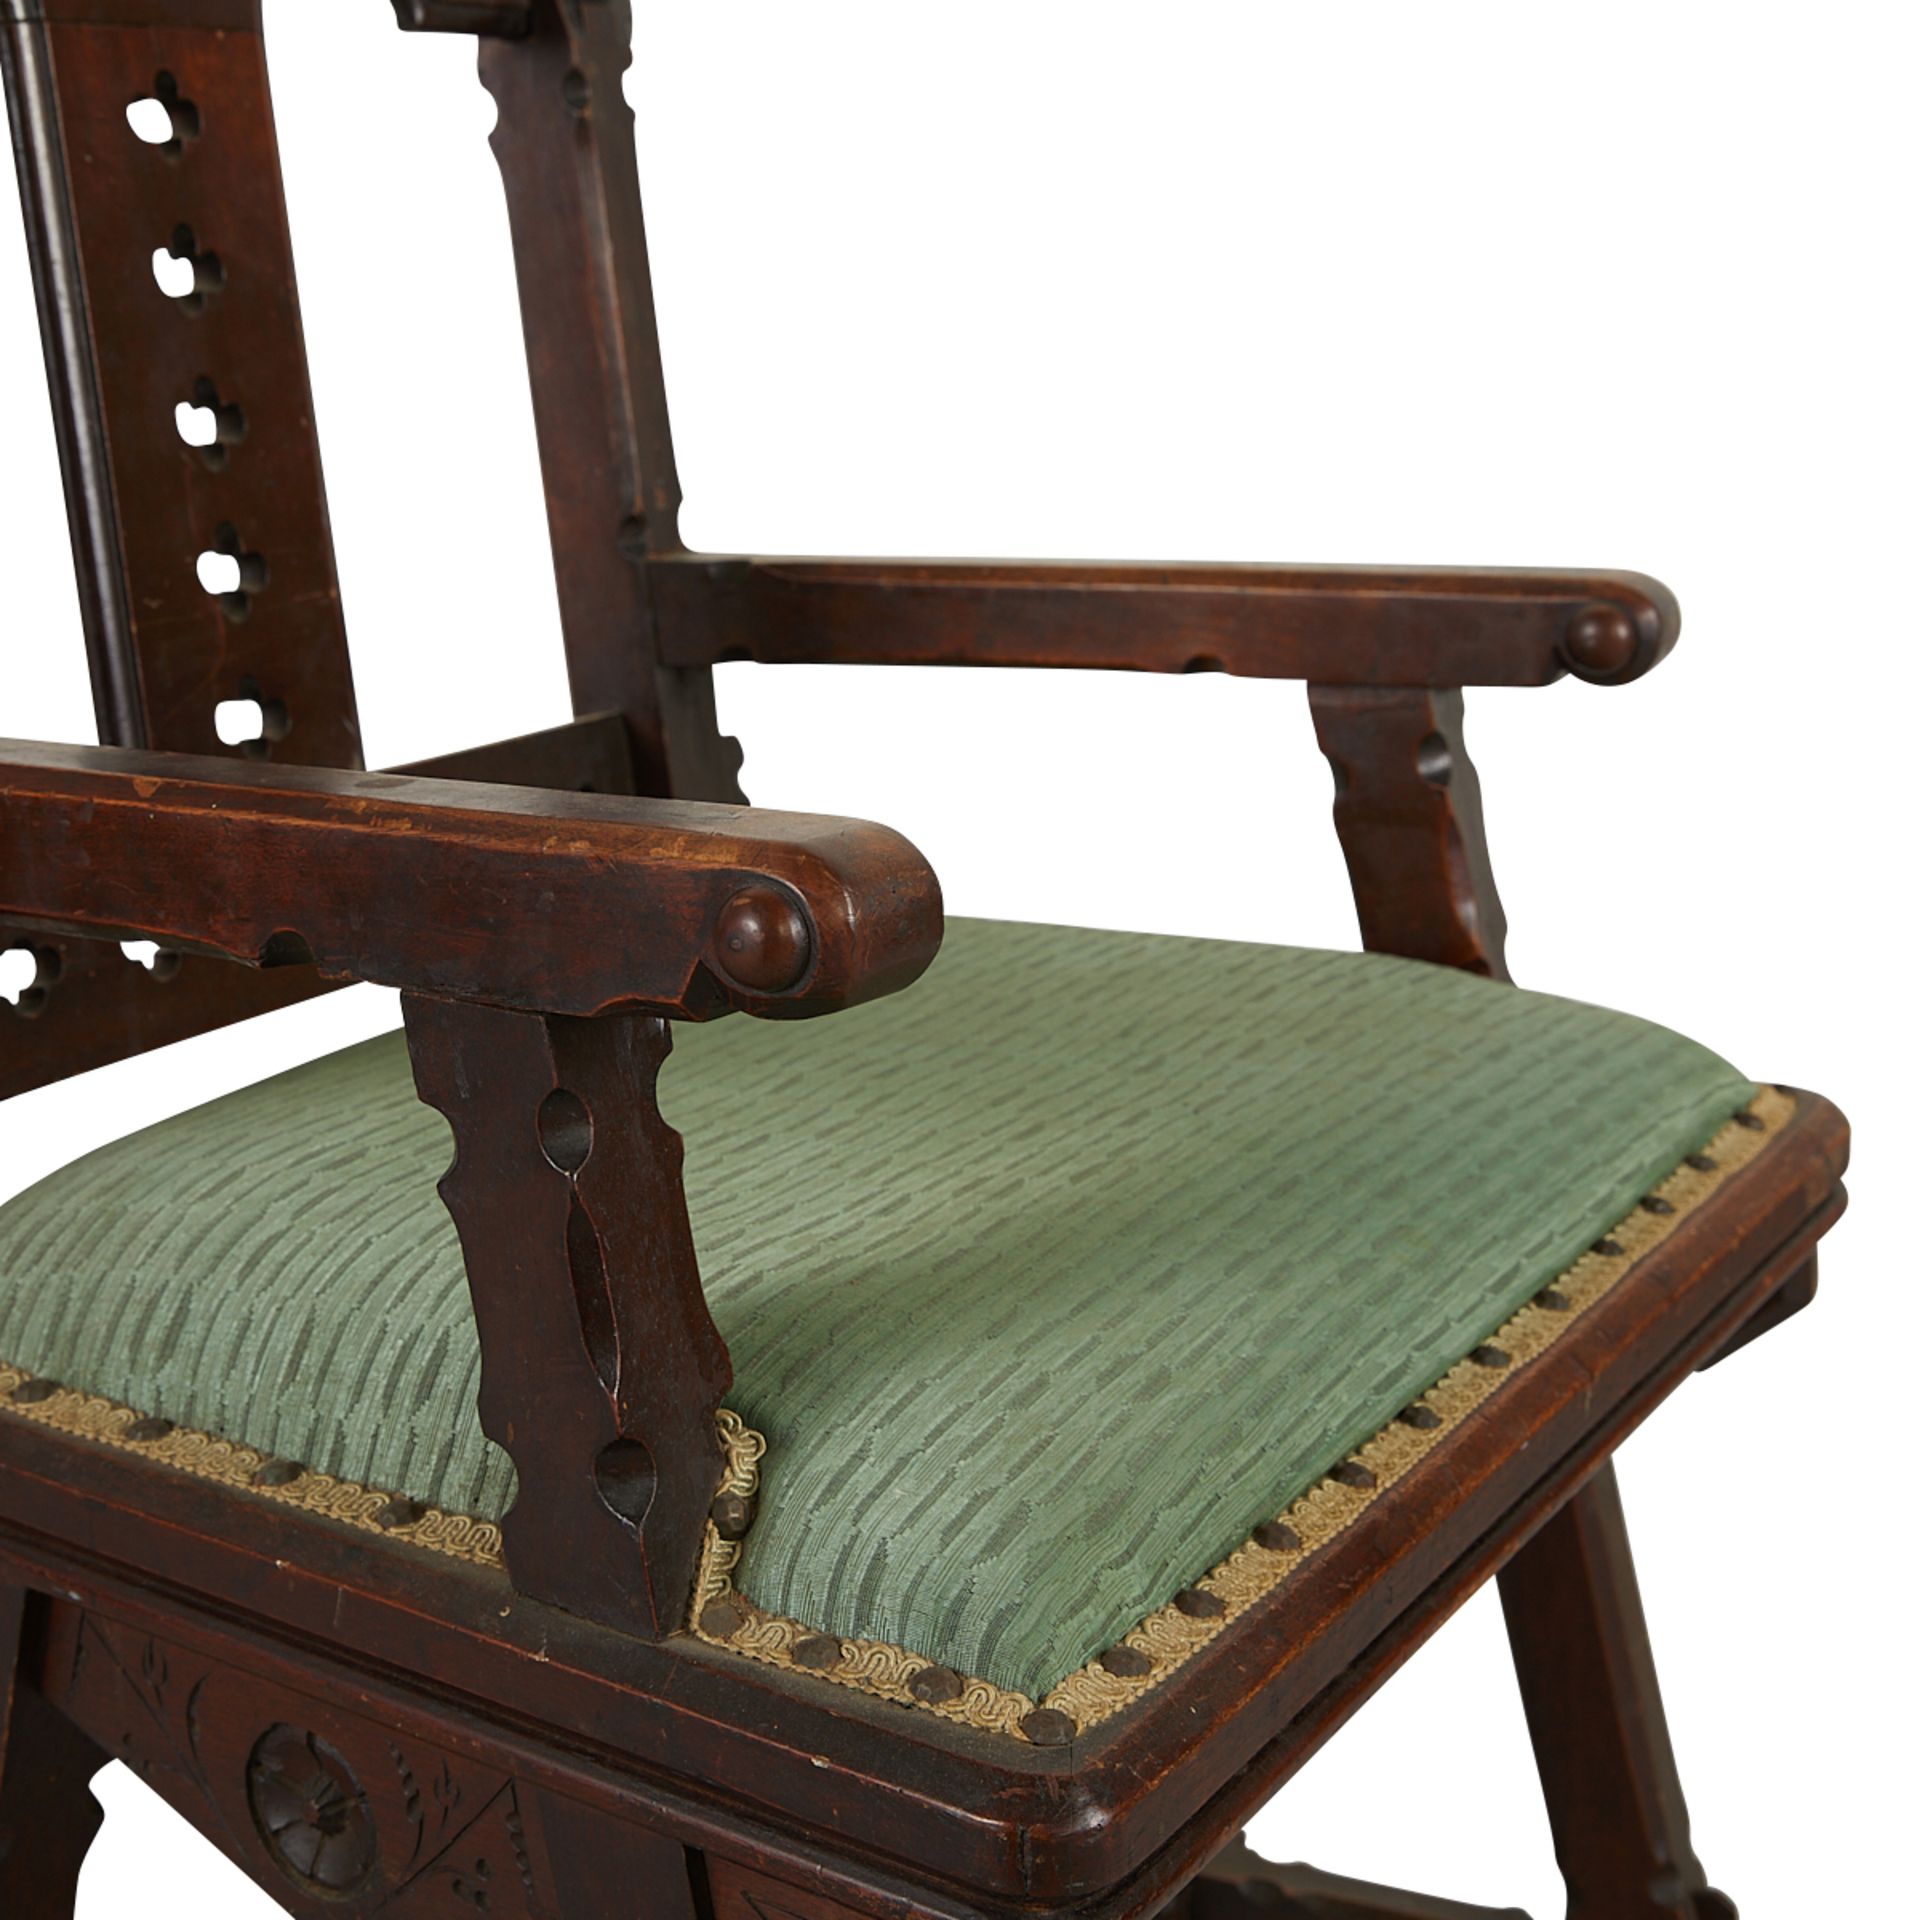 Aesthetic Movement Gothic Walnut Chair ca. 1875 - Image 2 of 11